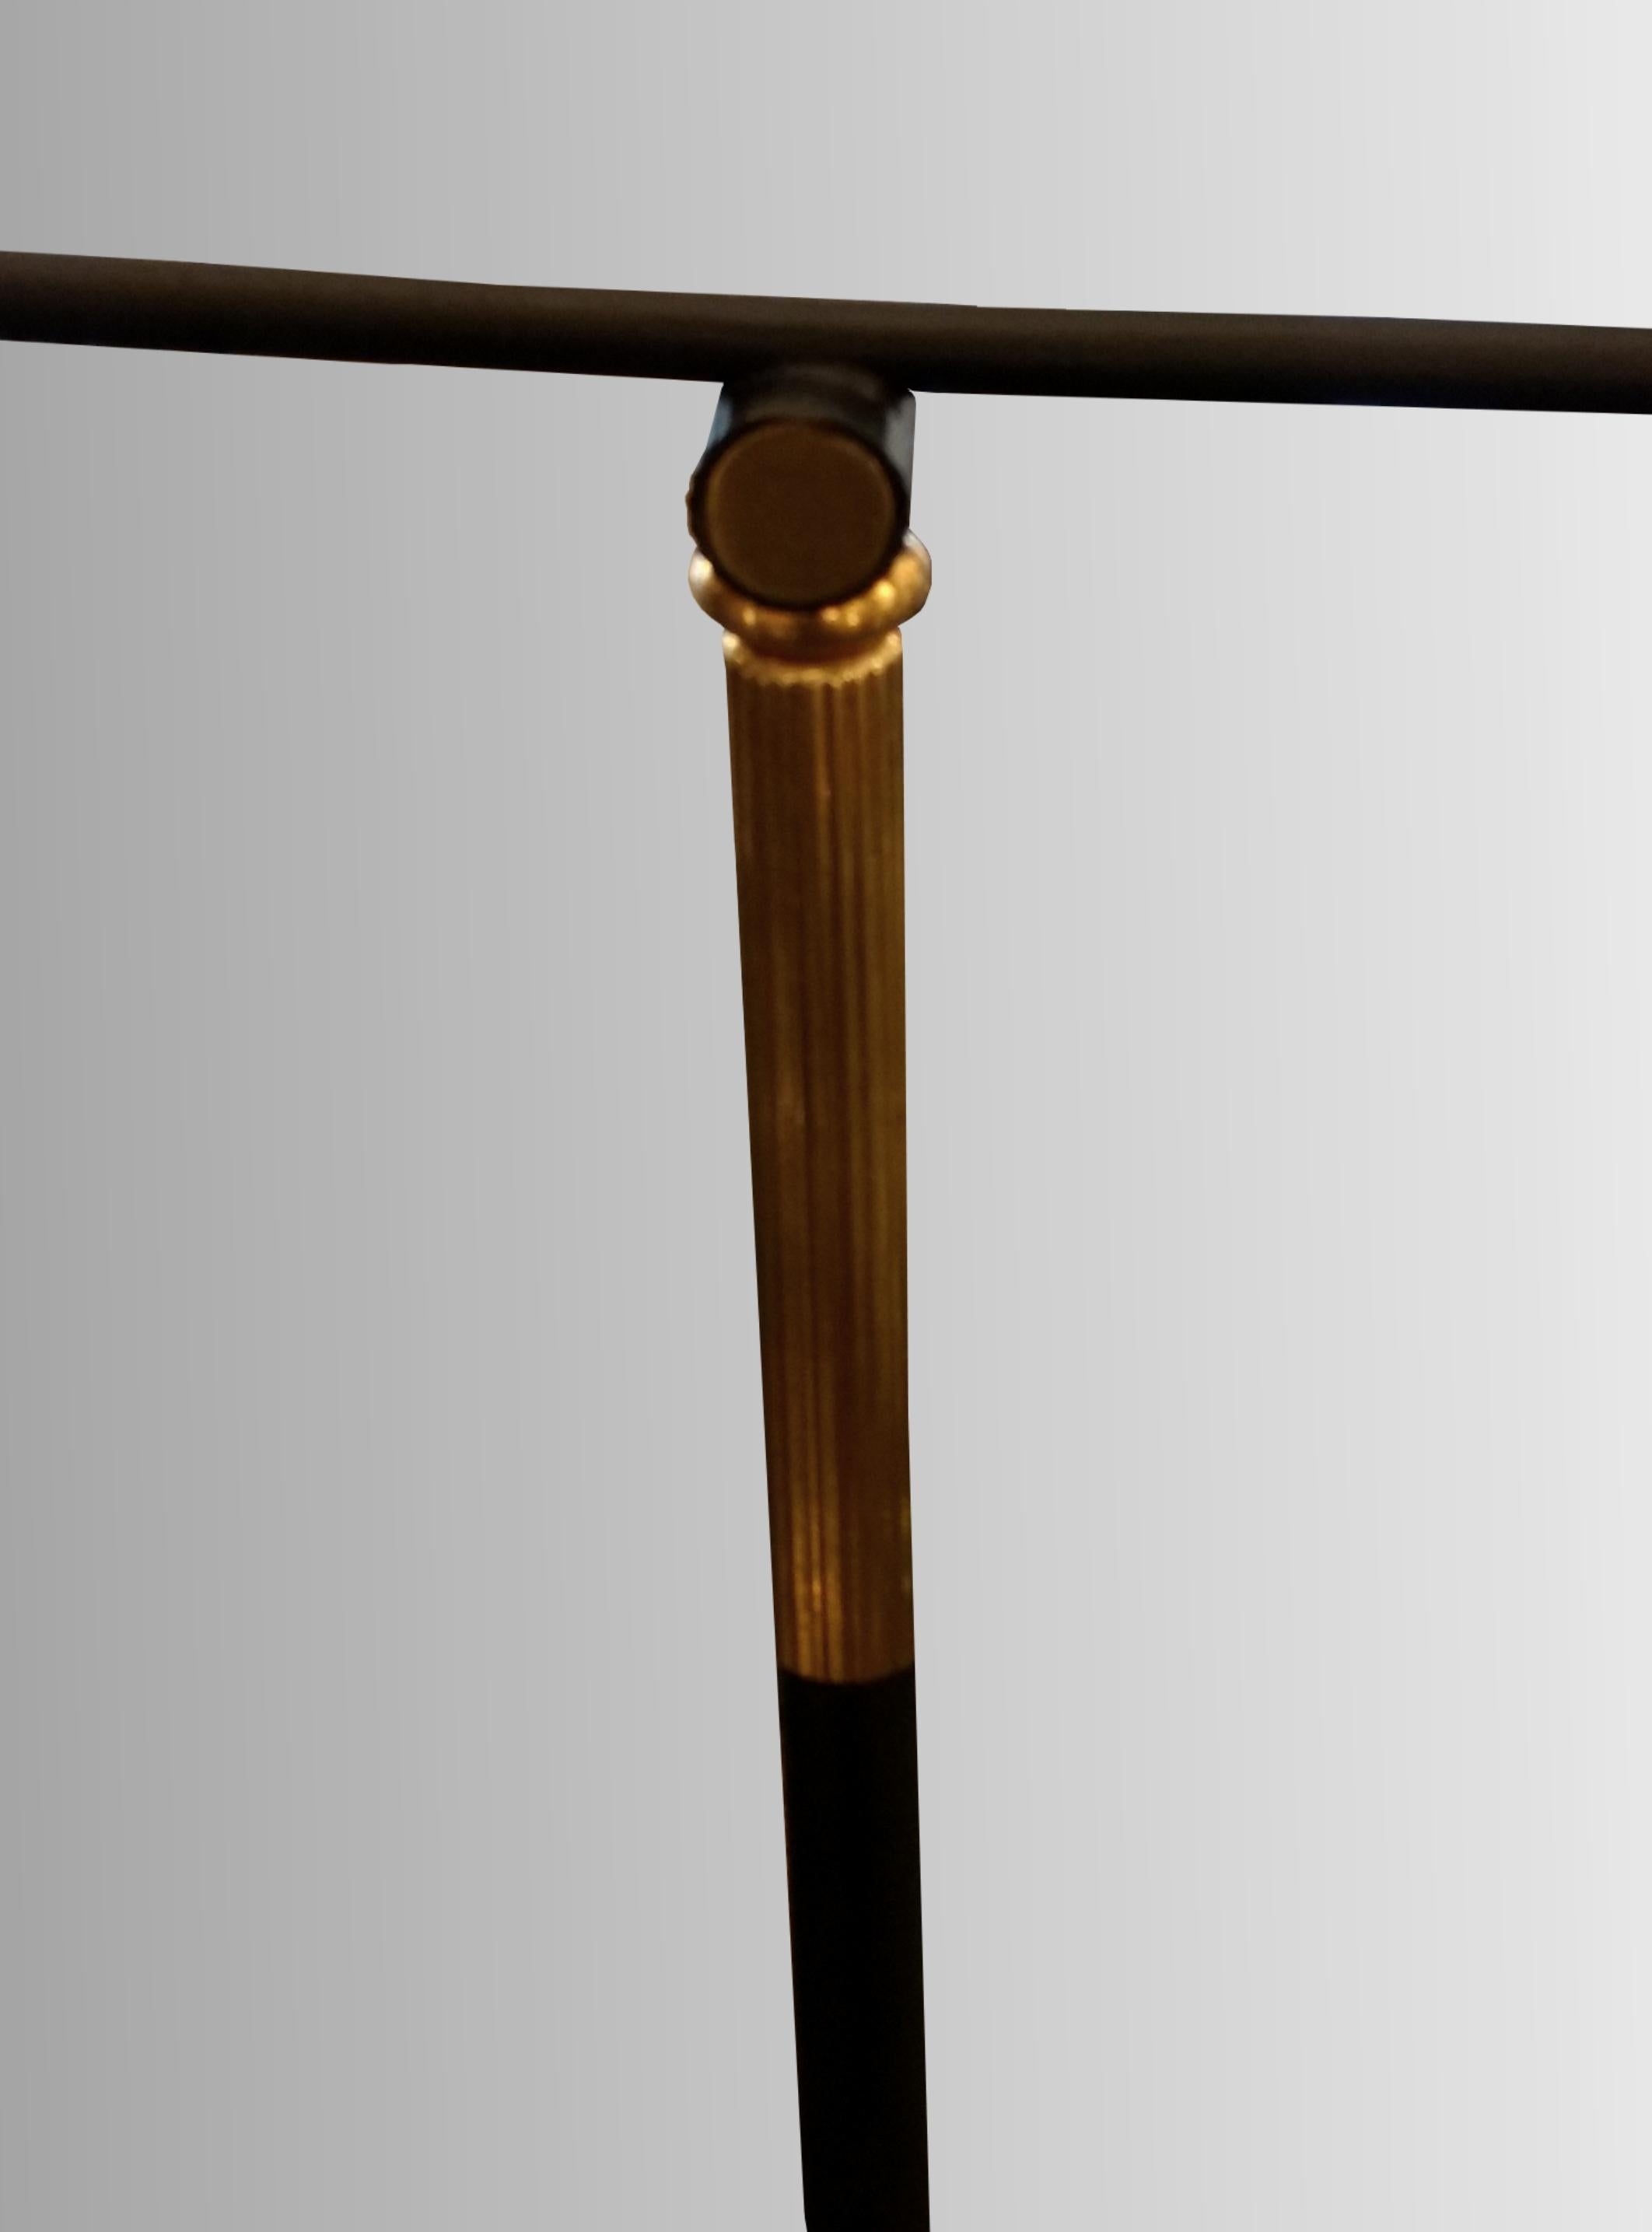 Brass T 644 Floor Lamp by Maison Lunel, France, circa 1950